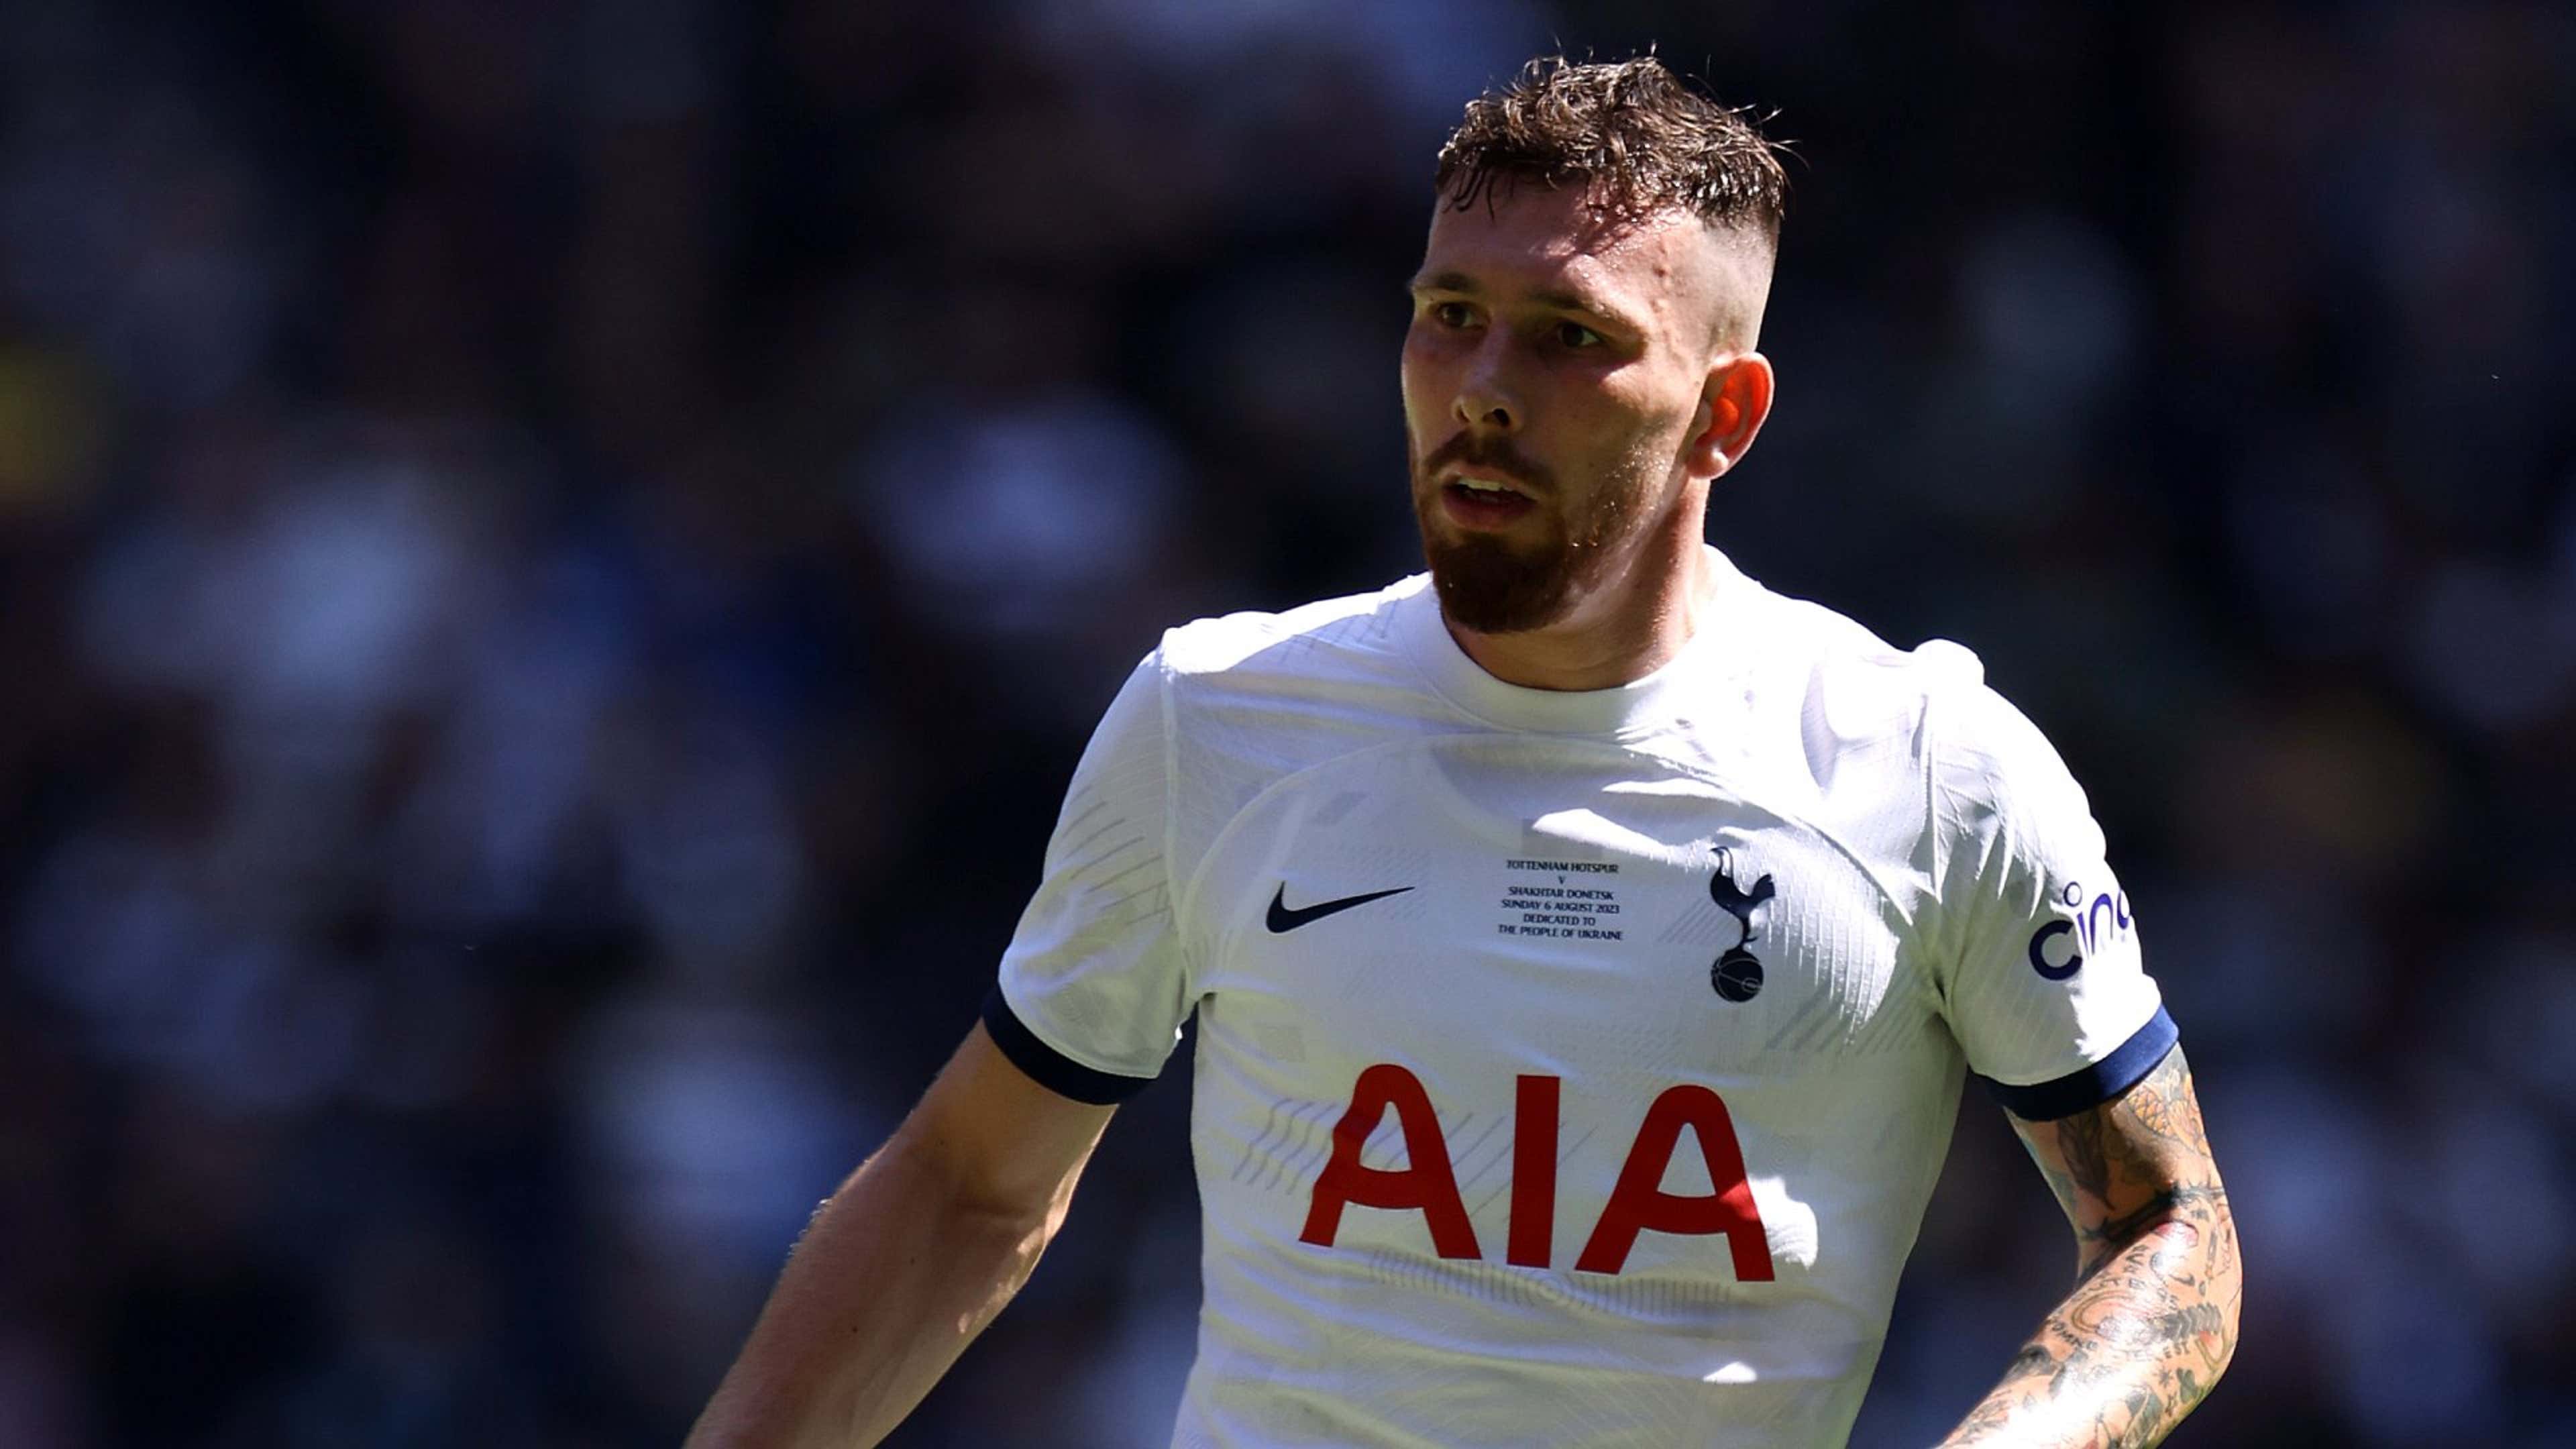 Pierre-Emile Hojbjerg expected to stay at Tottenham amid exit links.